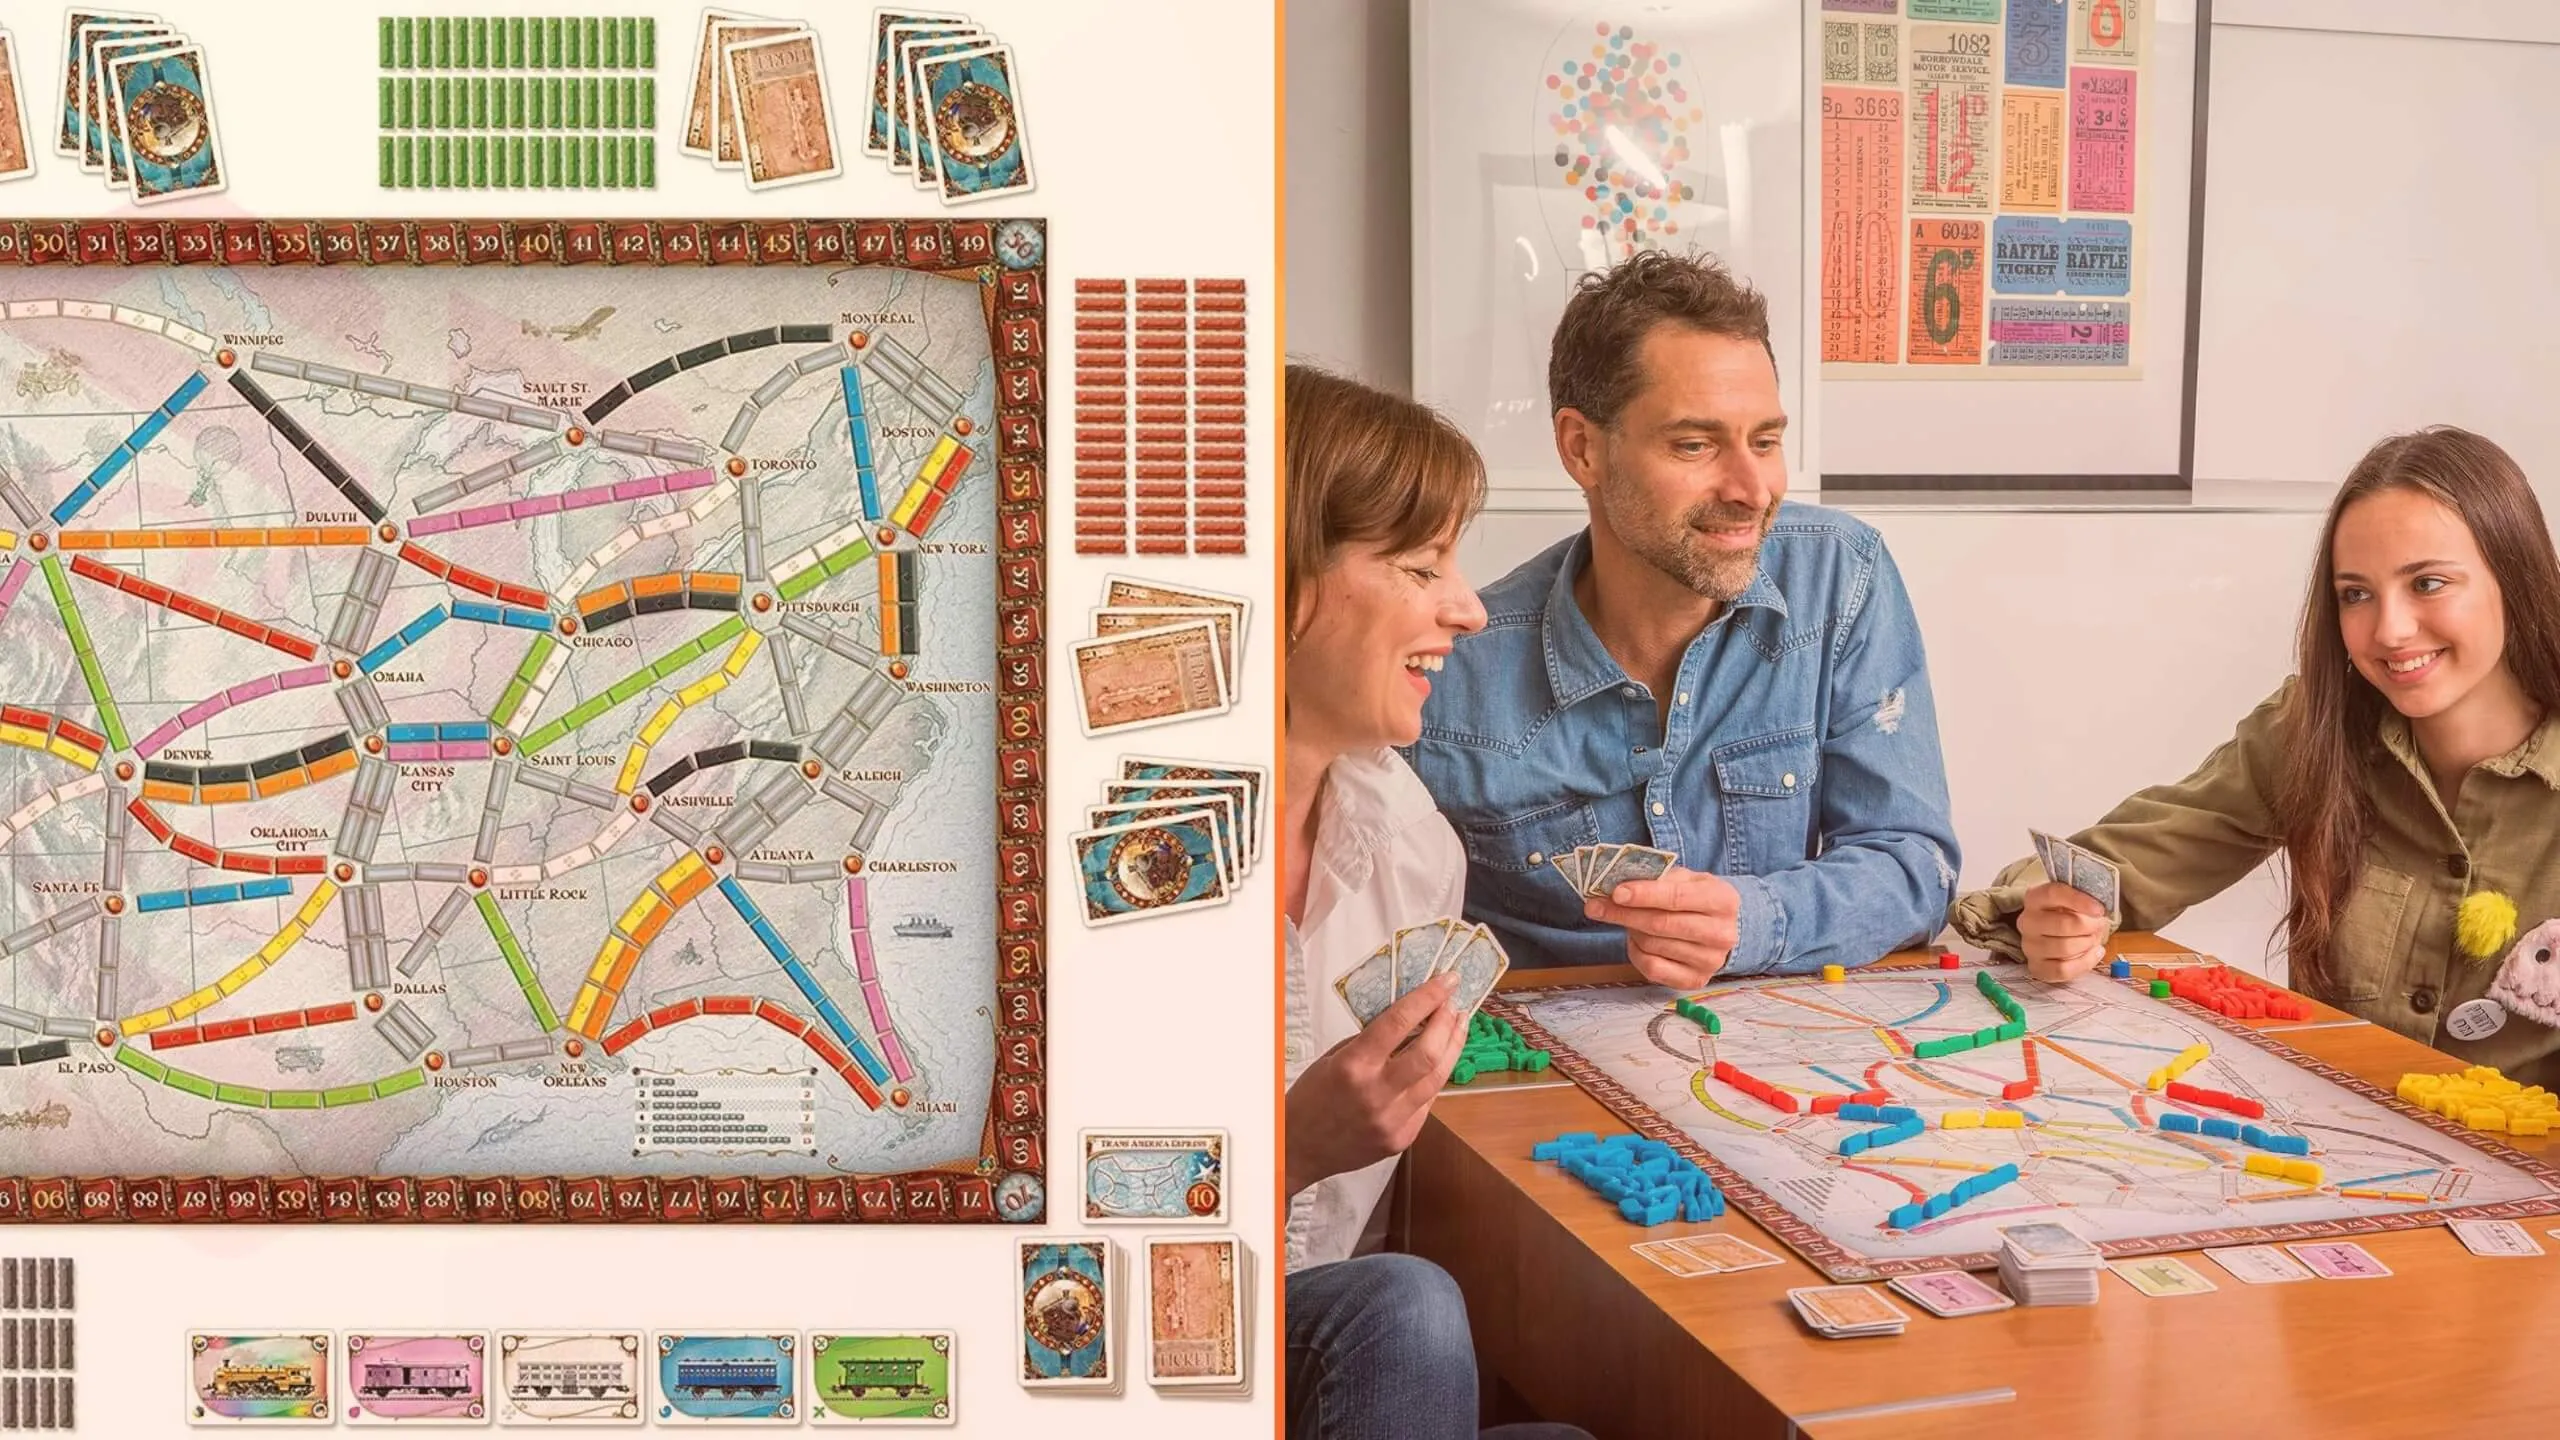 Ticket To Ride images